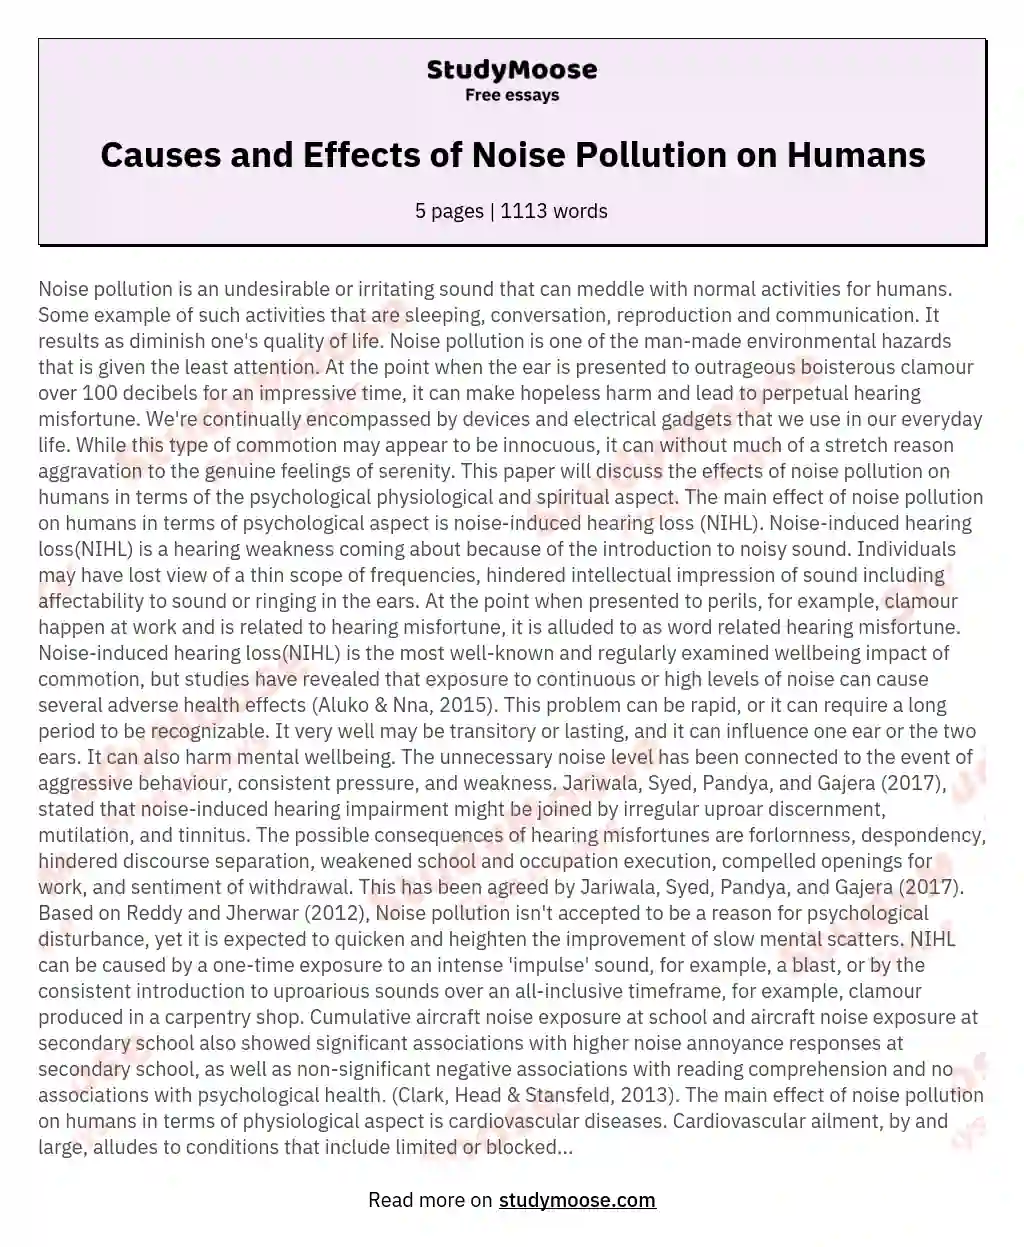 Causes and Effects of Noise Pollution on Humans essay